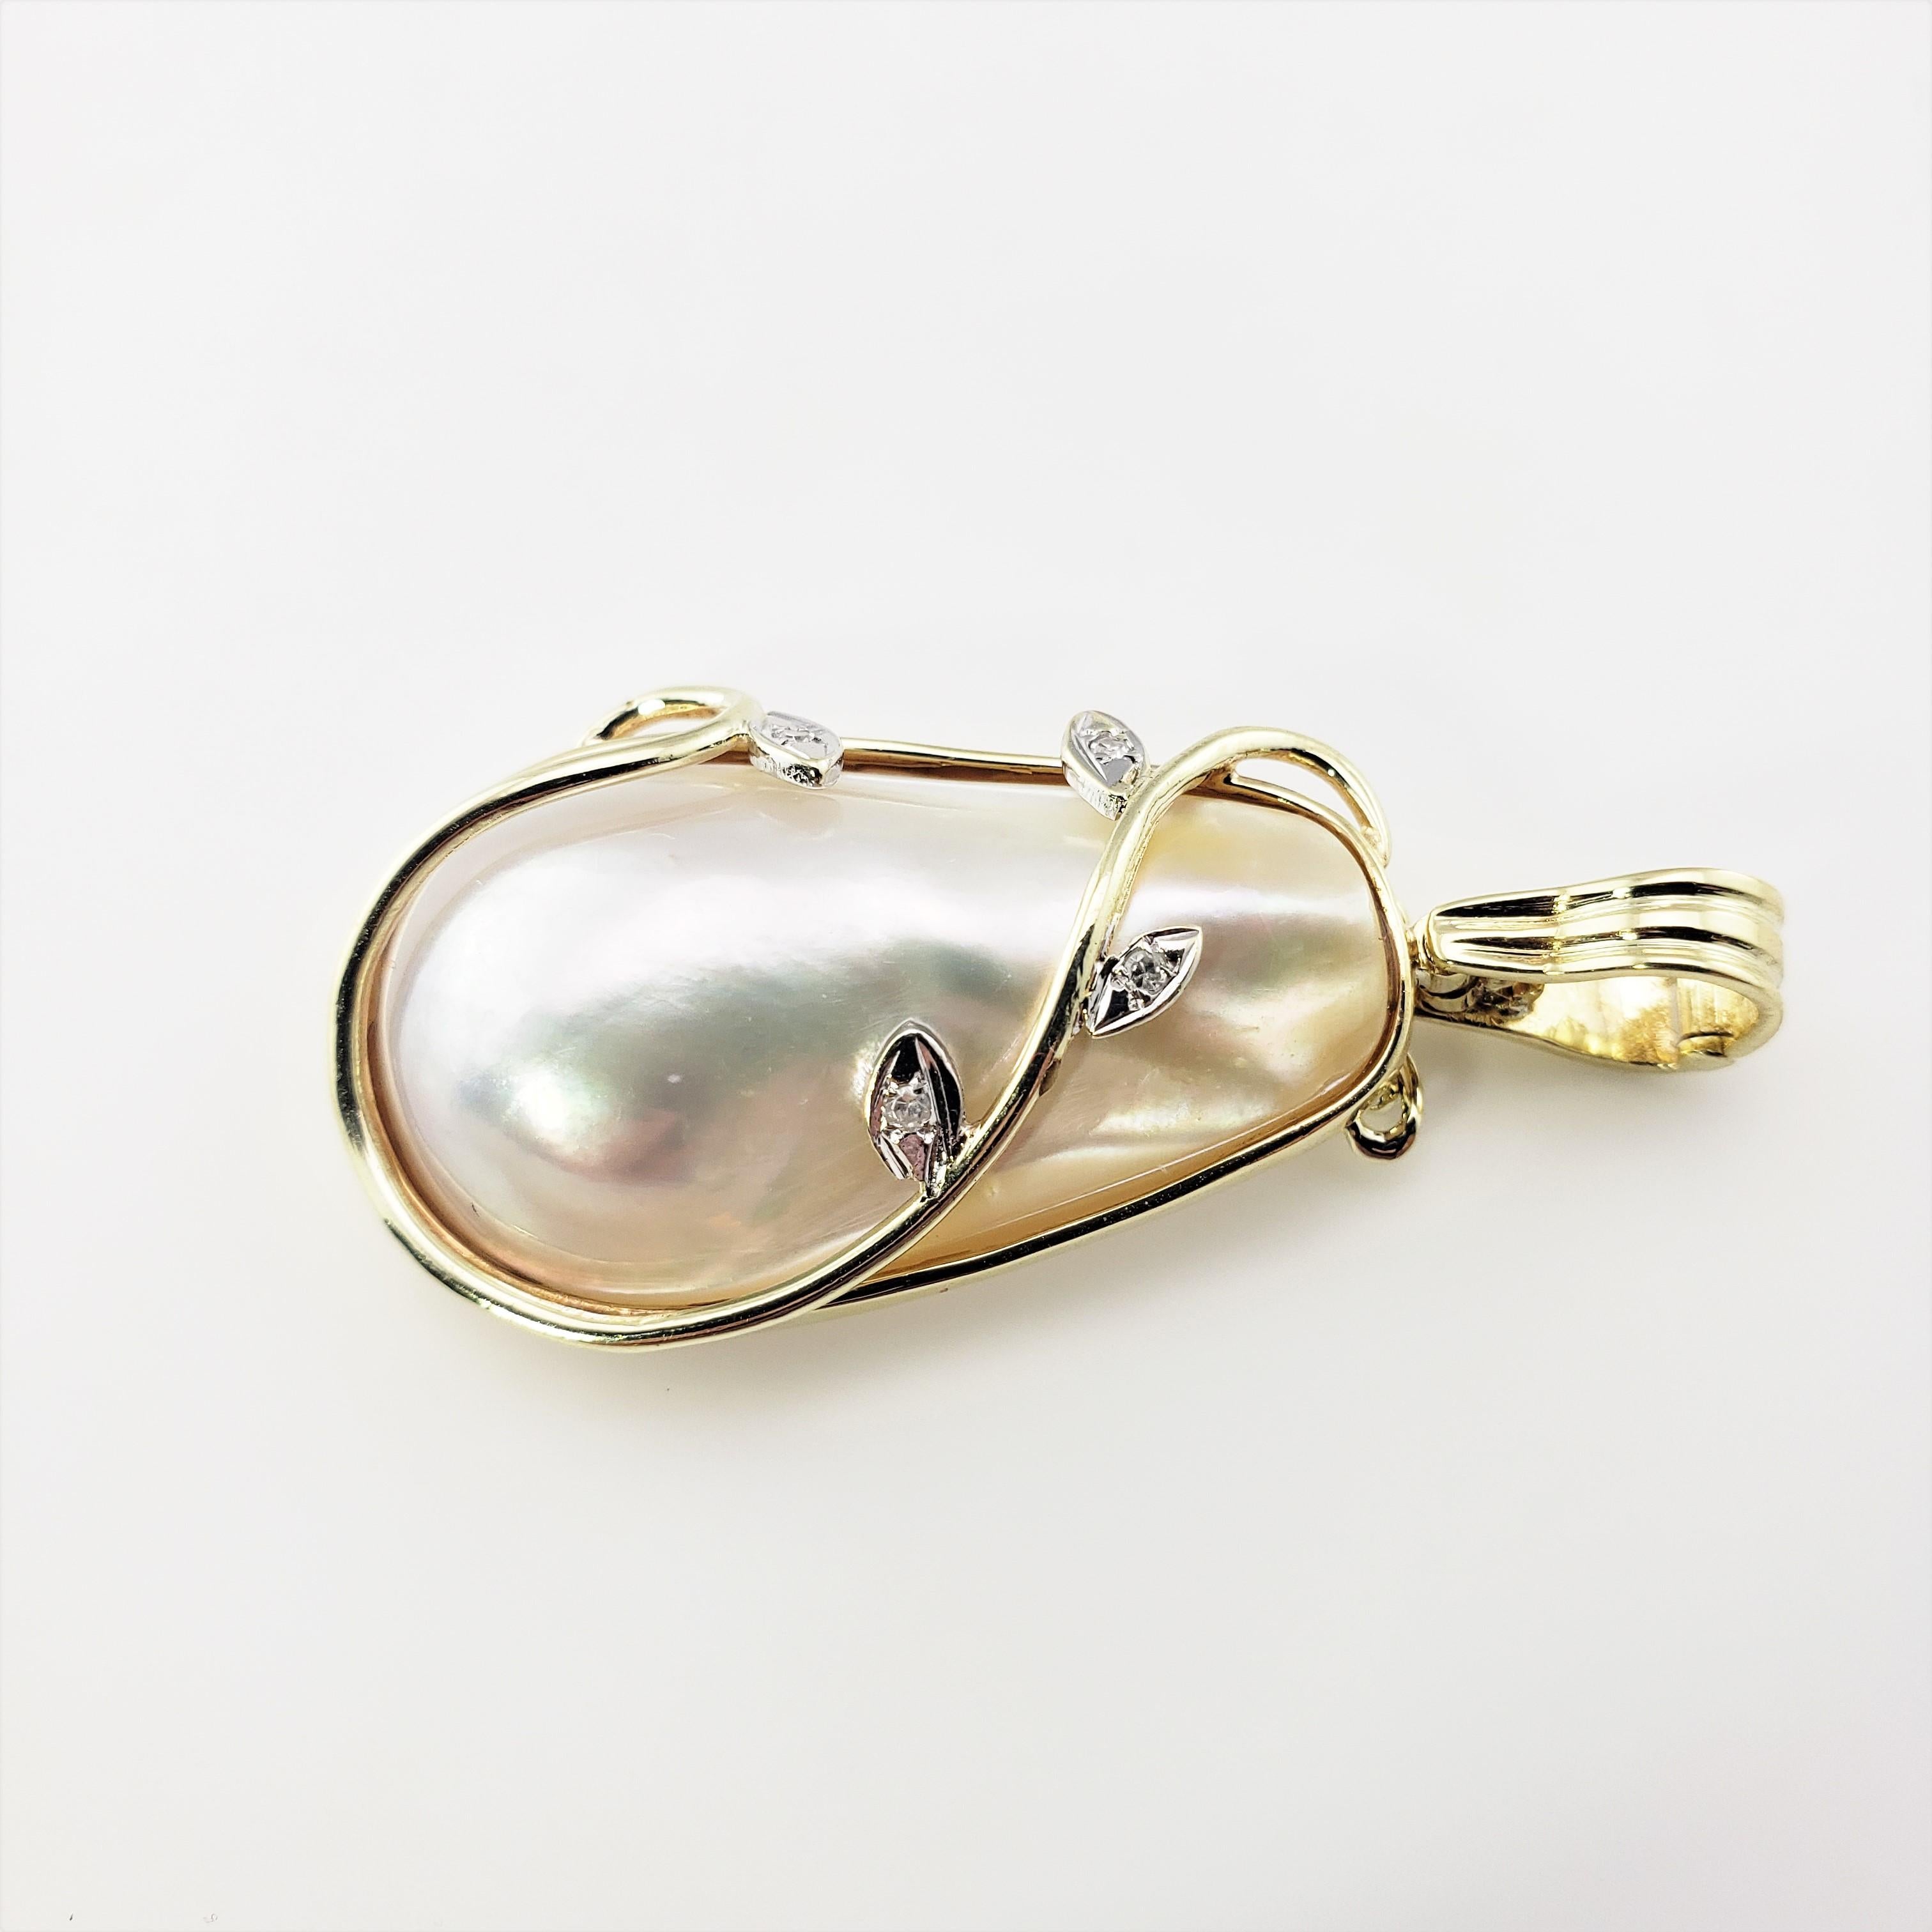 14 Karat Yellow Gold Baroque Pearl and Diamond Pendant-

This lovely pendant features one baroque pearl accented with four round single cut diamonds set in classic 14K yellow gold.

*Chain not included.

Approximate total diamond weight:  .02